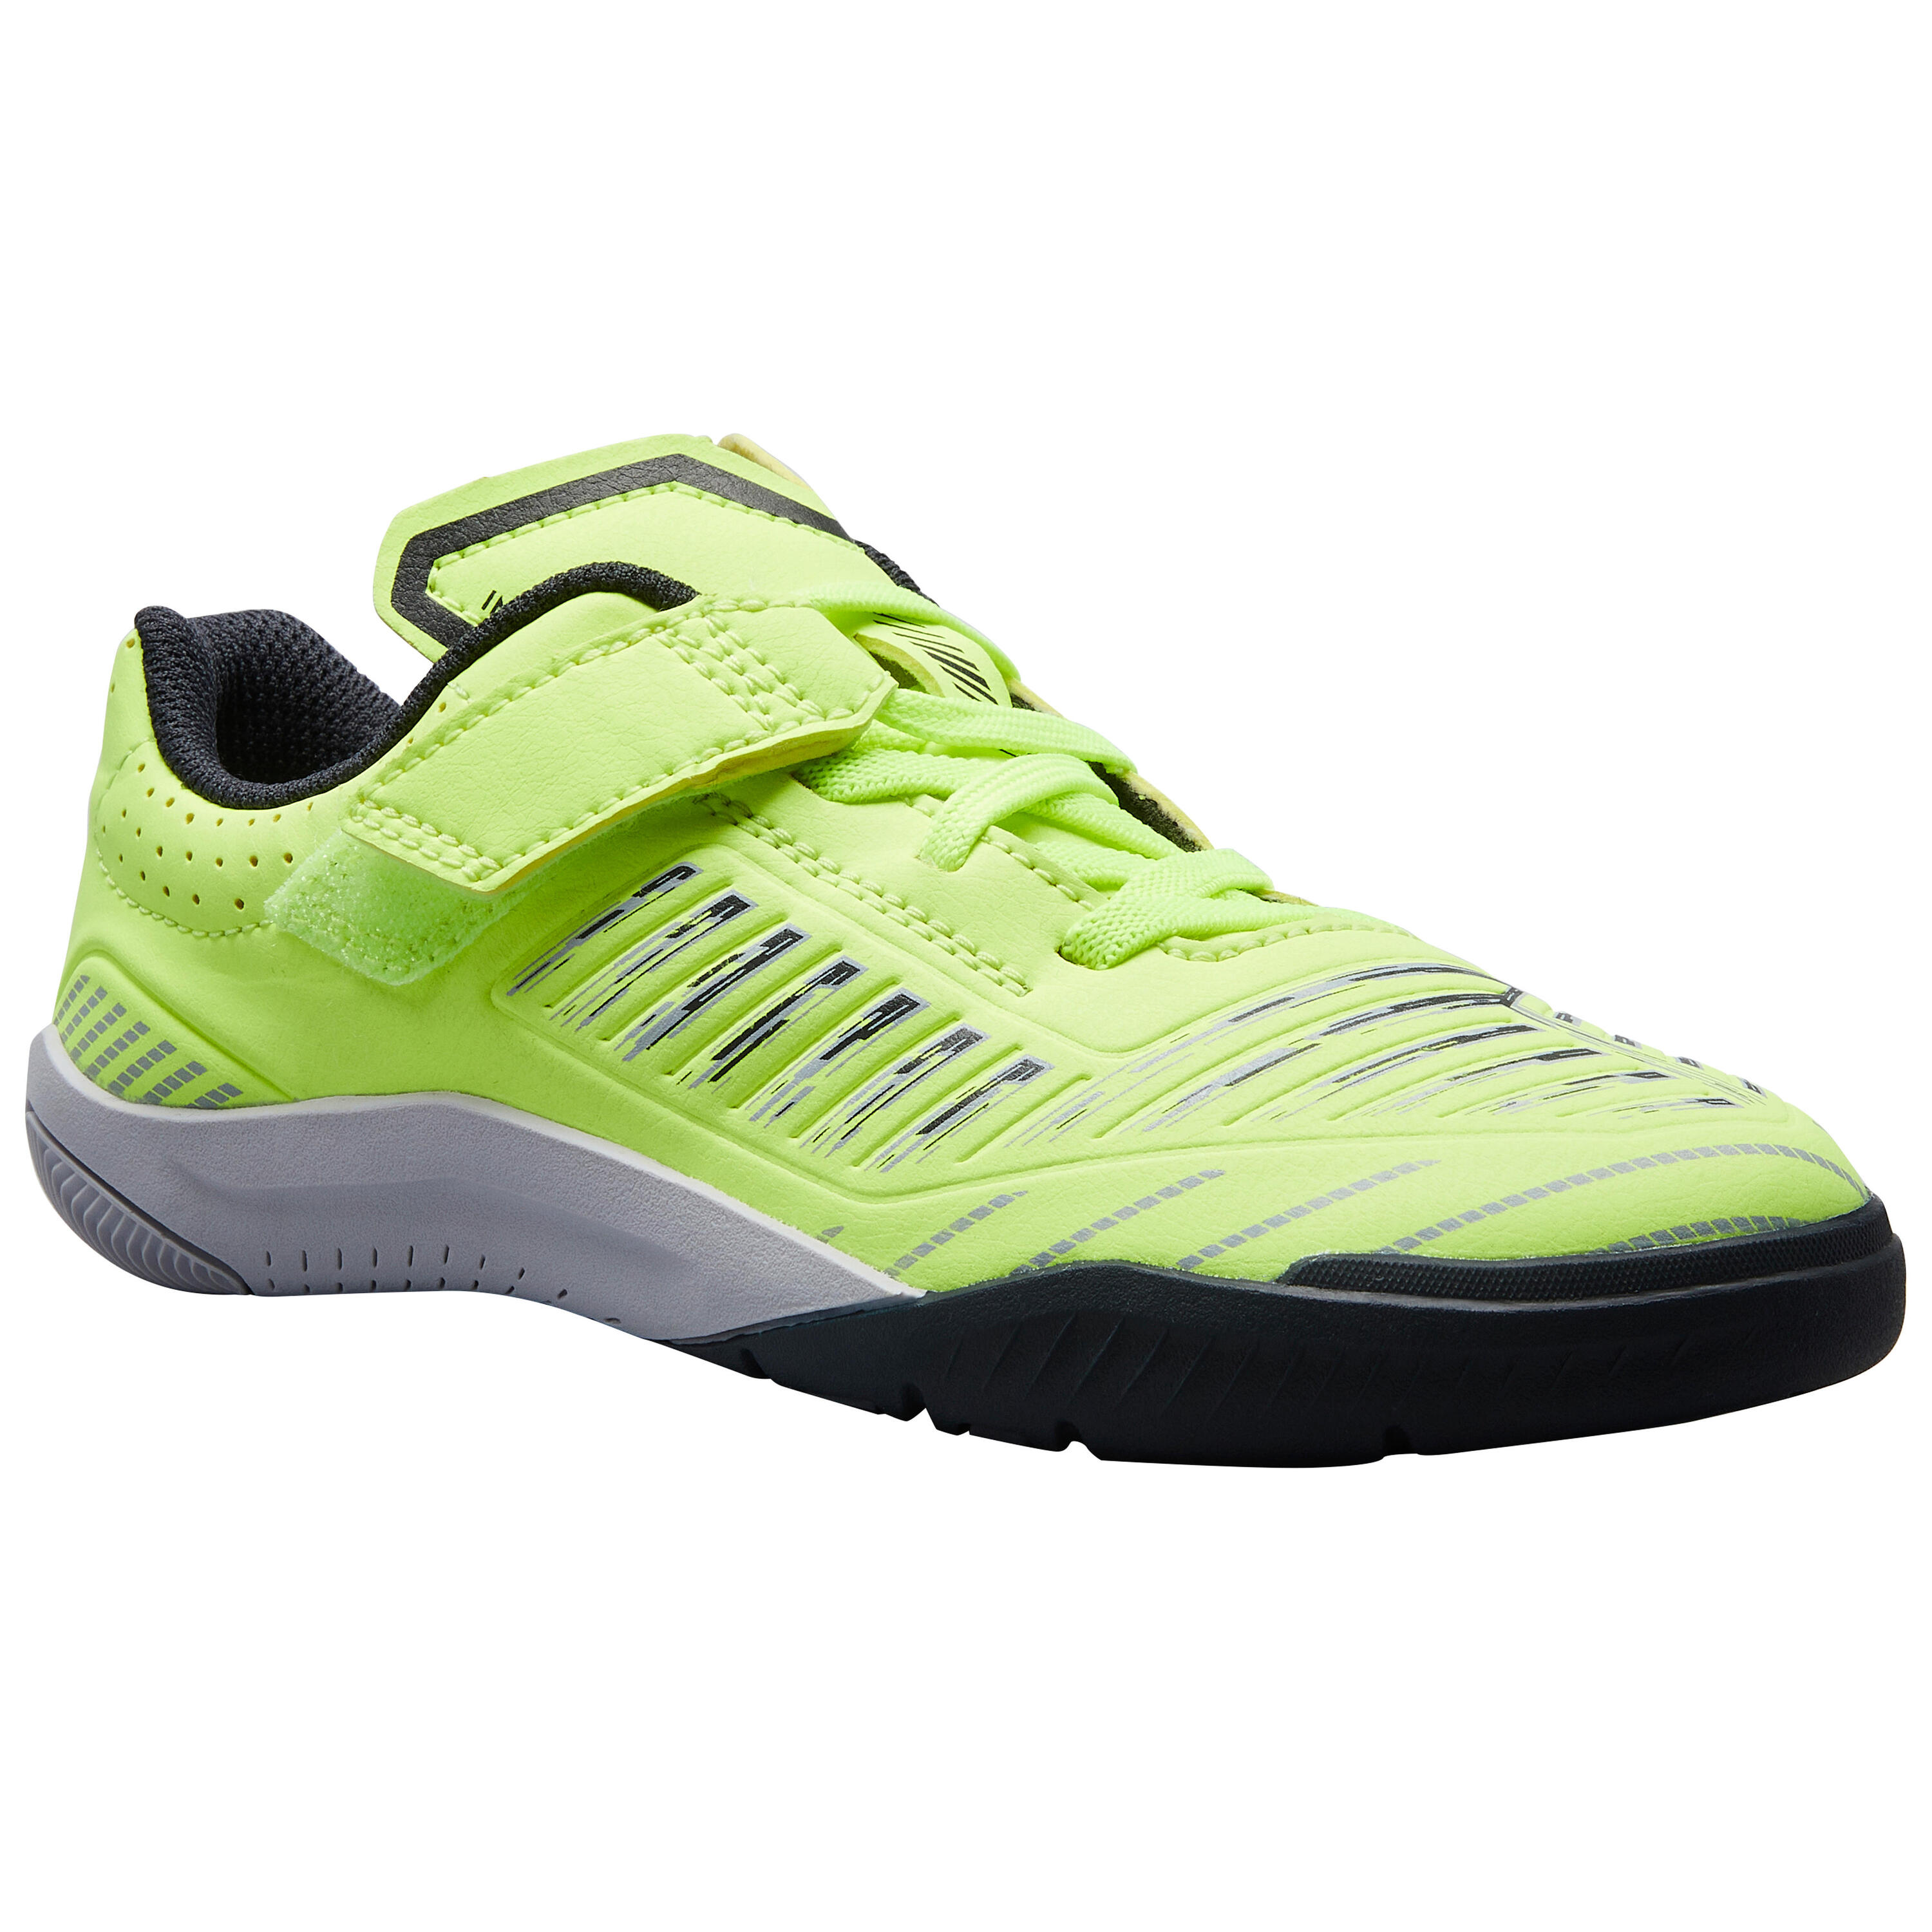 fluo lime yellow / graphite grey / pale grey